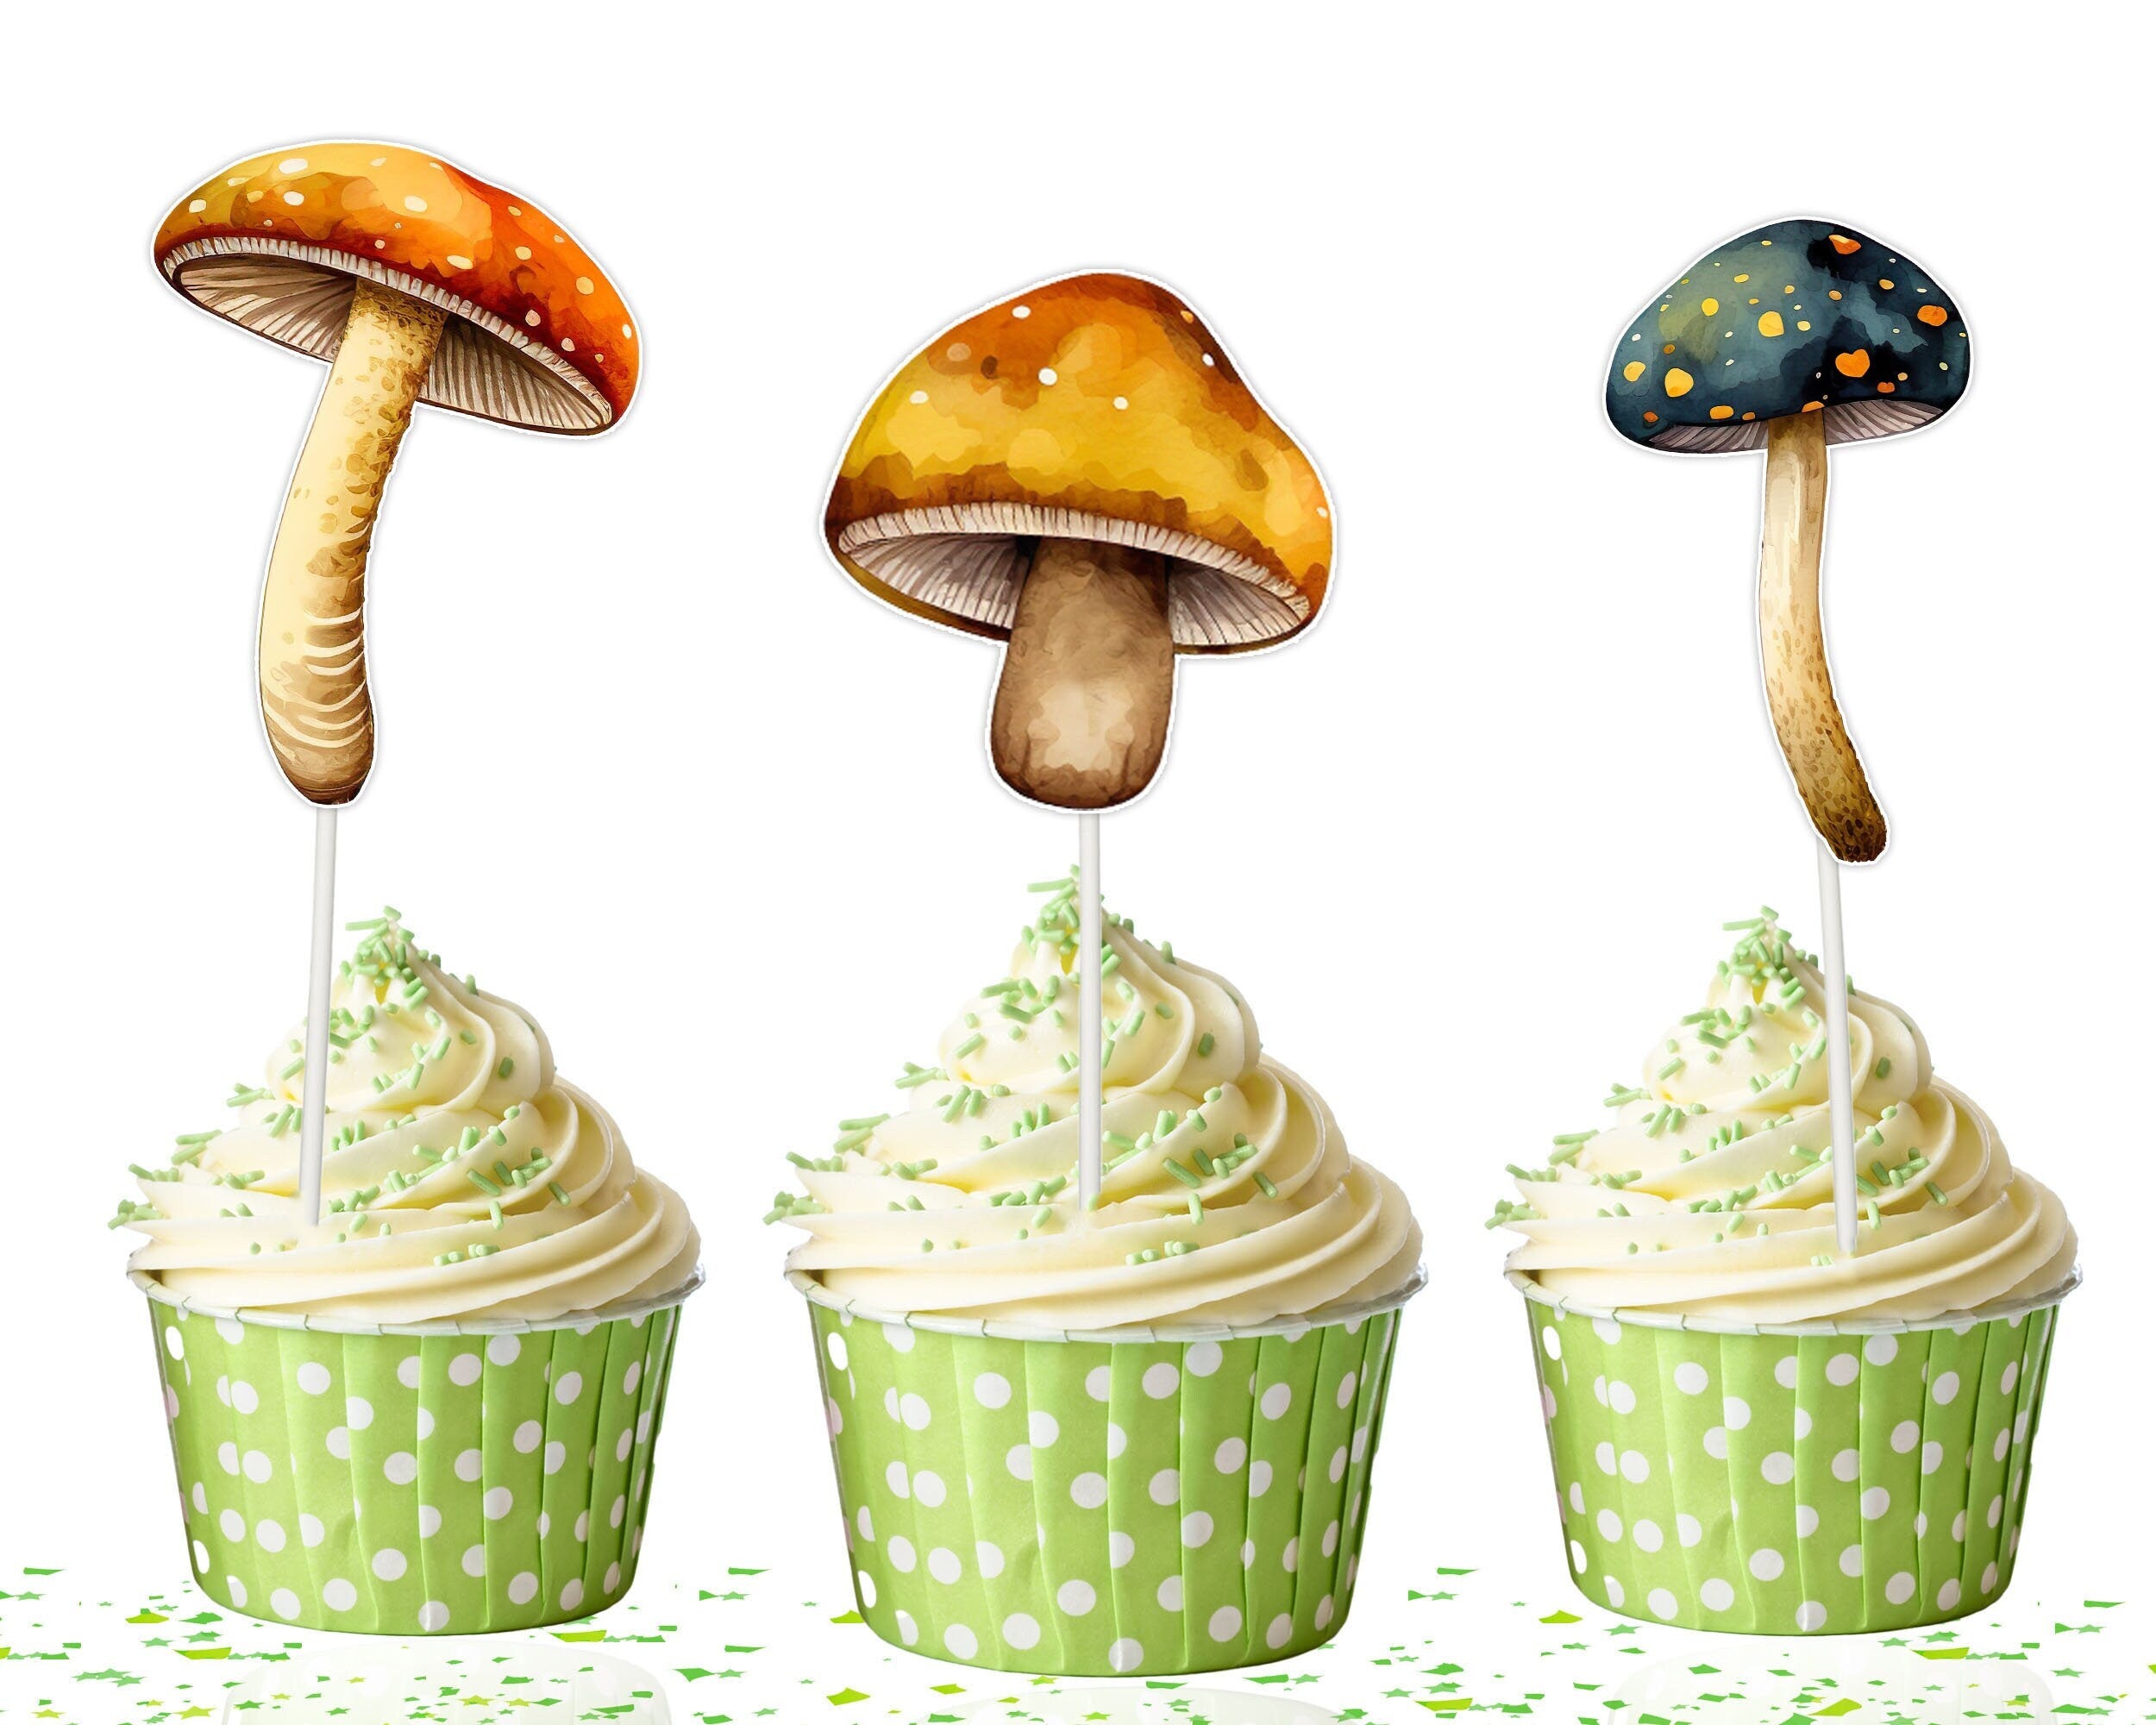 "Enchanted Mycology" - Forest Mushrooms Cupcake Toppers for a Whimsical Party Treat